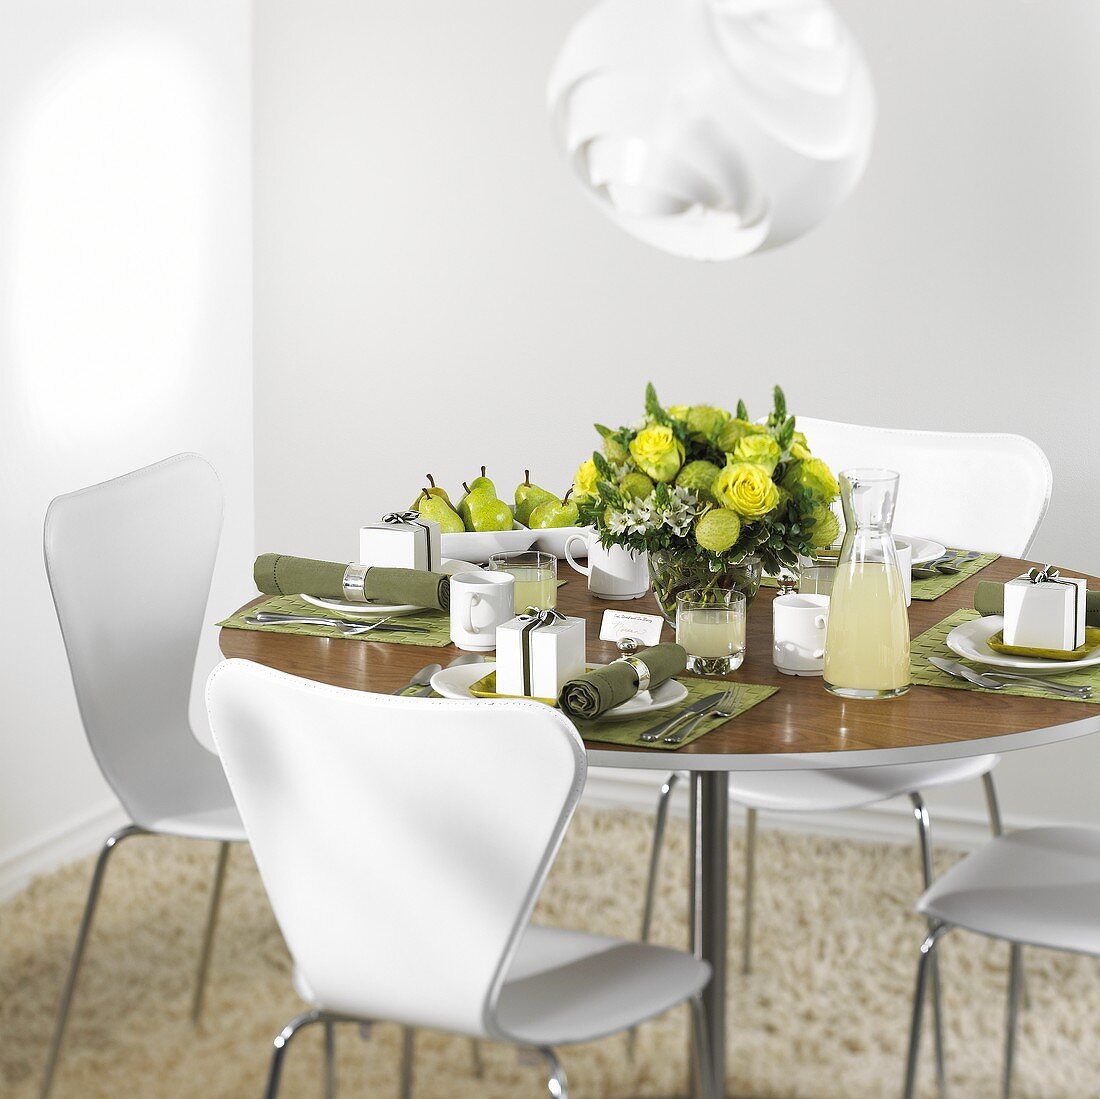 Table laid in green and white with white chairs